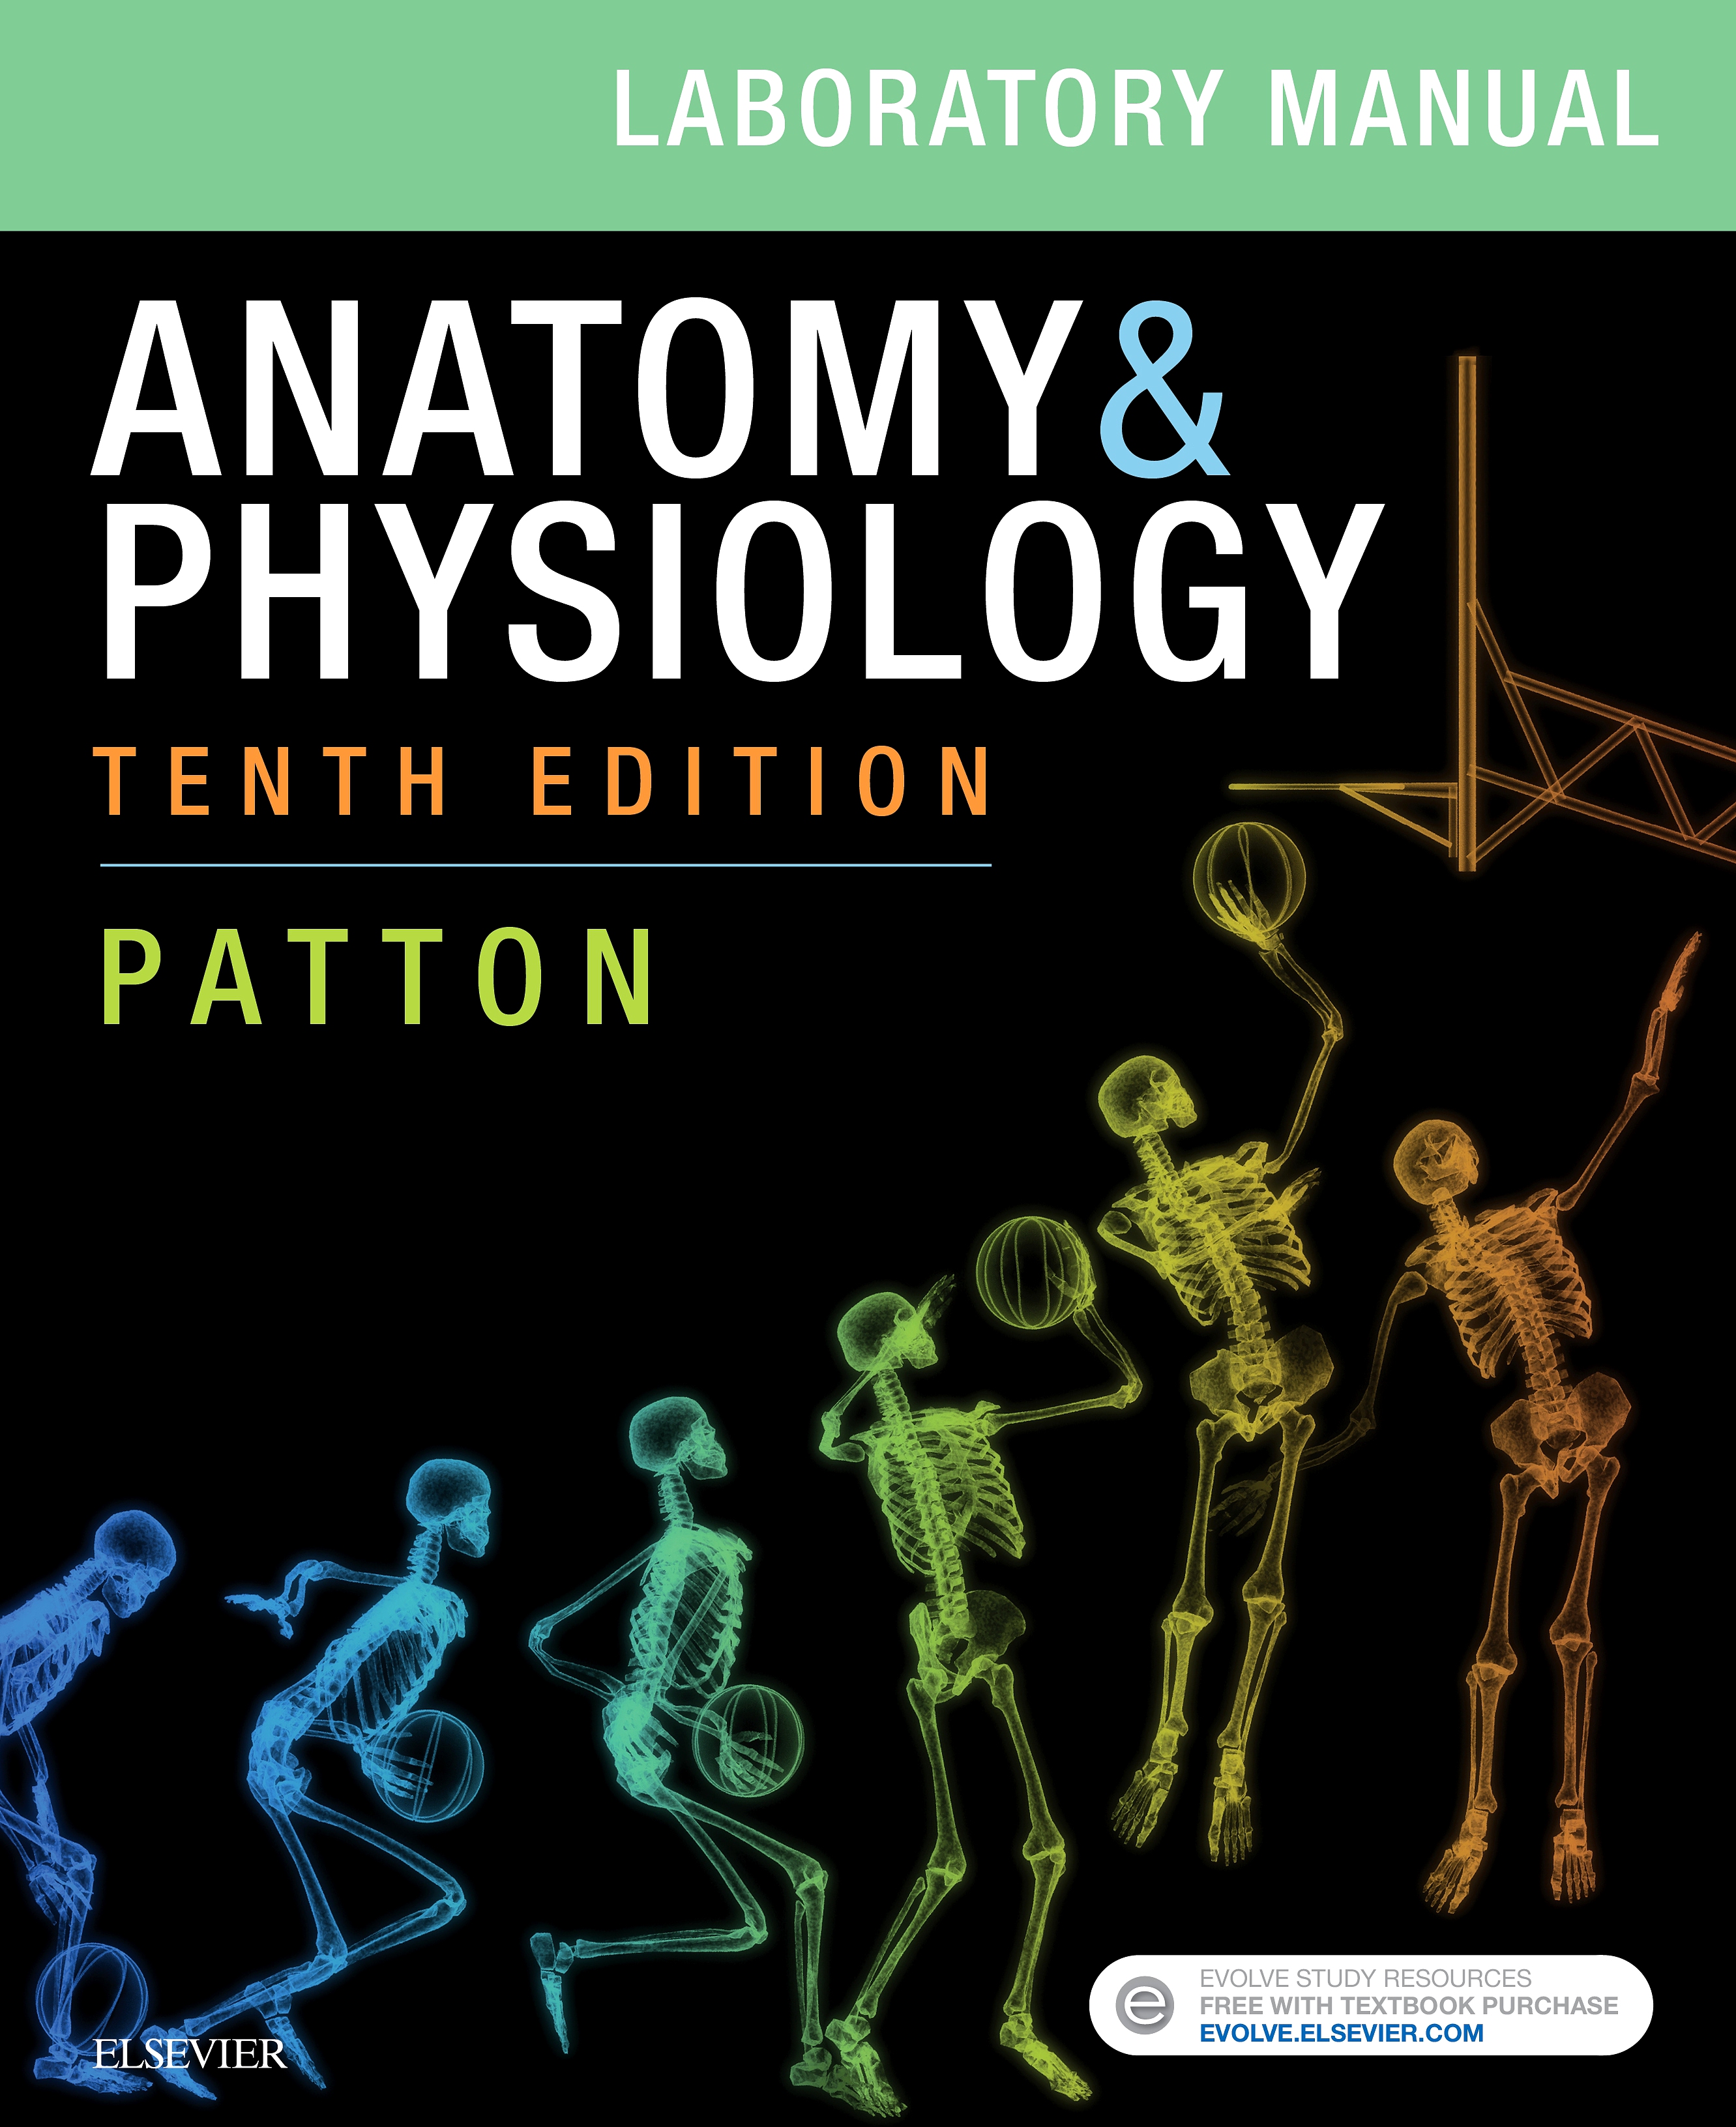 Evolve Resources for Anatomy & Physiology Laboratory Manual, 10th Edition